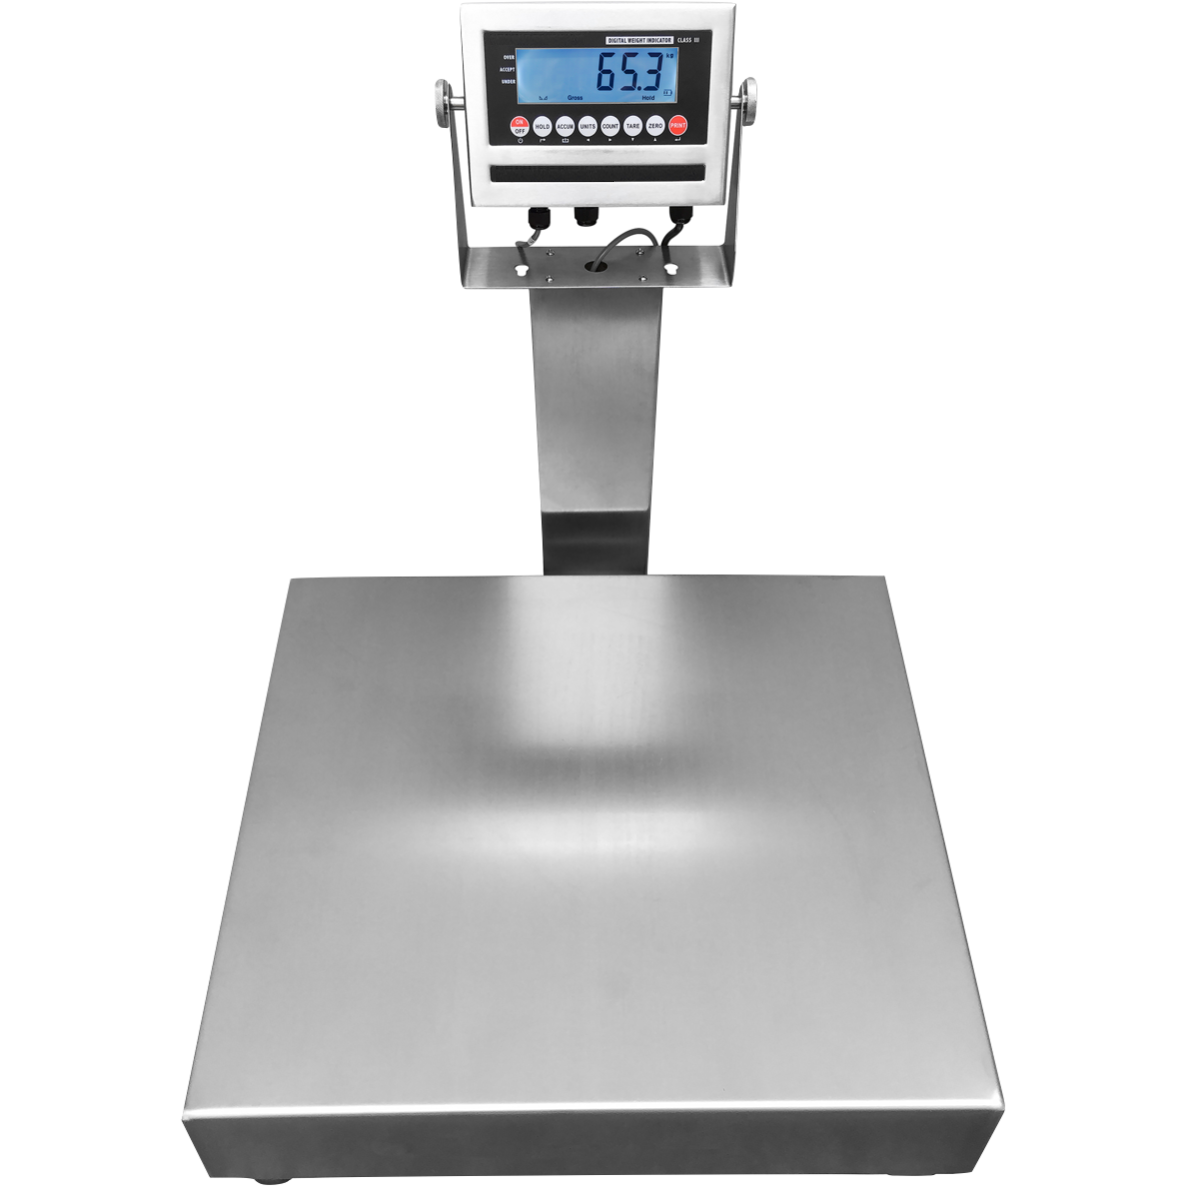 Heavy Lifting upto 20,000 lbs? Go Wireless with SellEton SL-W-CR Scale